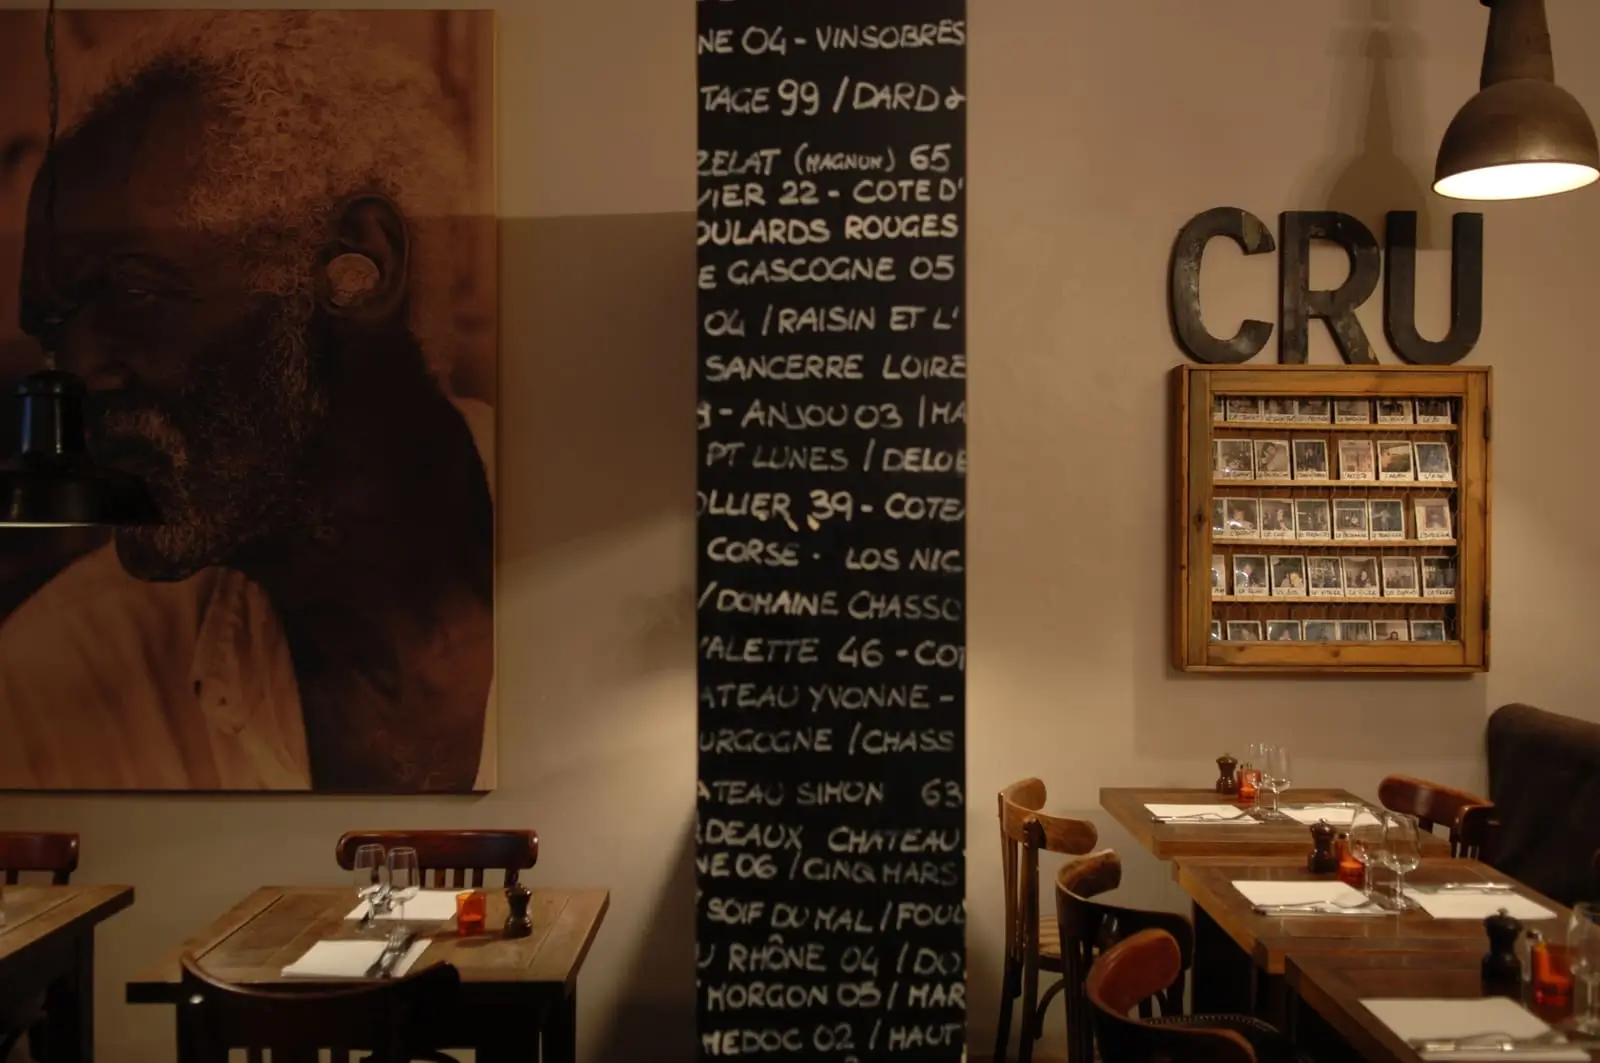 Warmly lit dining space at Cinq-Mars bistro in Paris, with tables ready for guests and a wall featuring a wine list, a large 'CRU' sign, and a framed collection of vintage photographs.